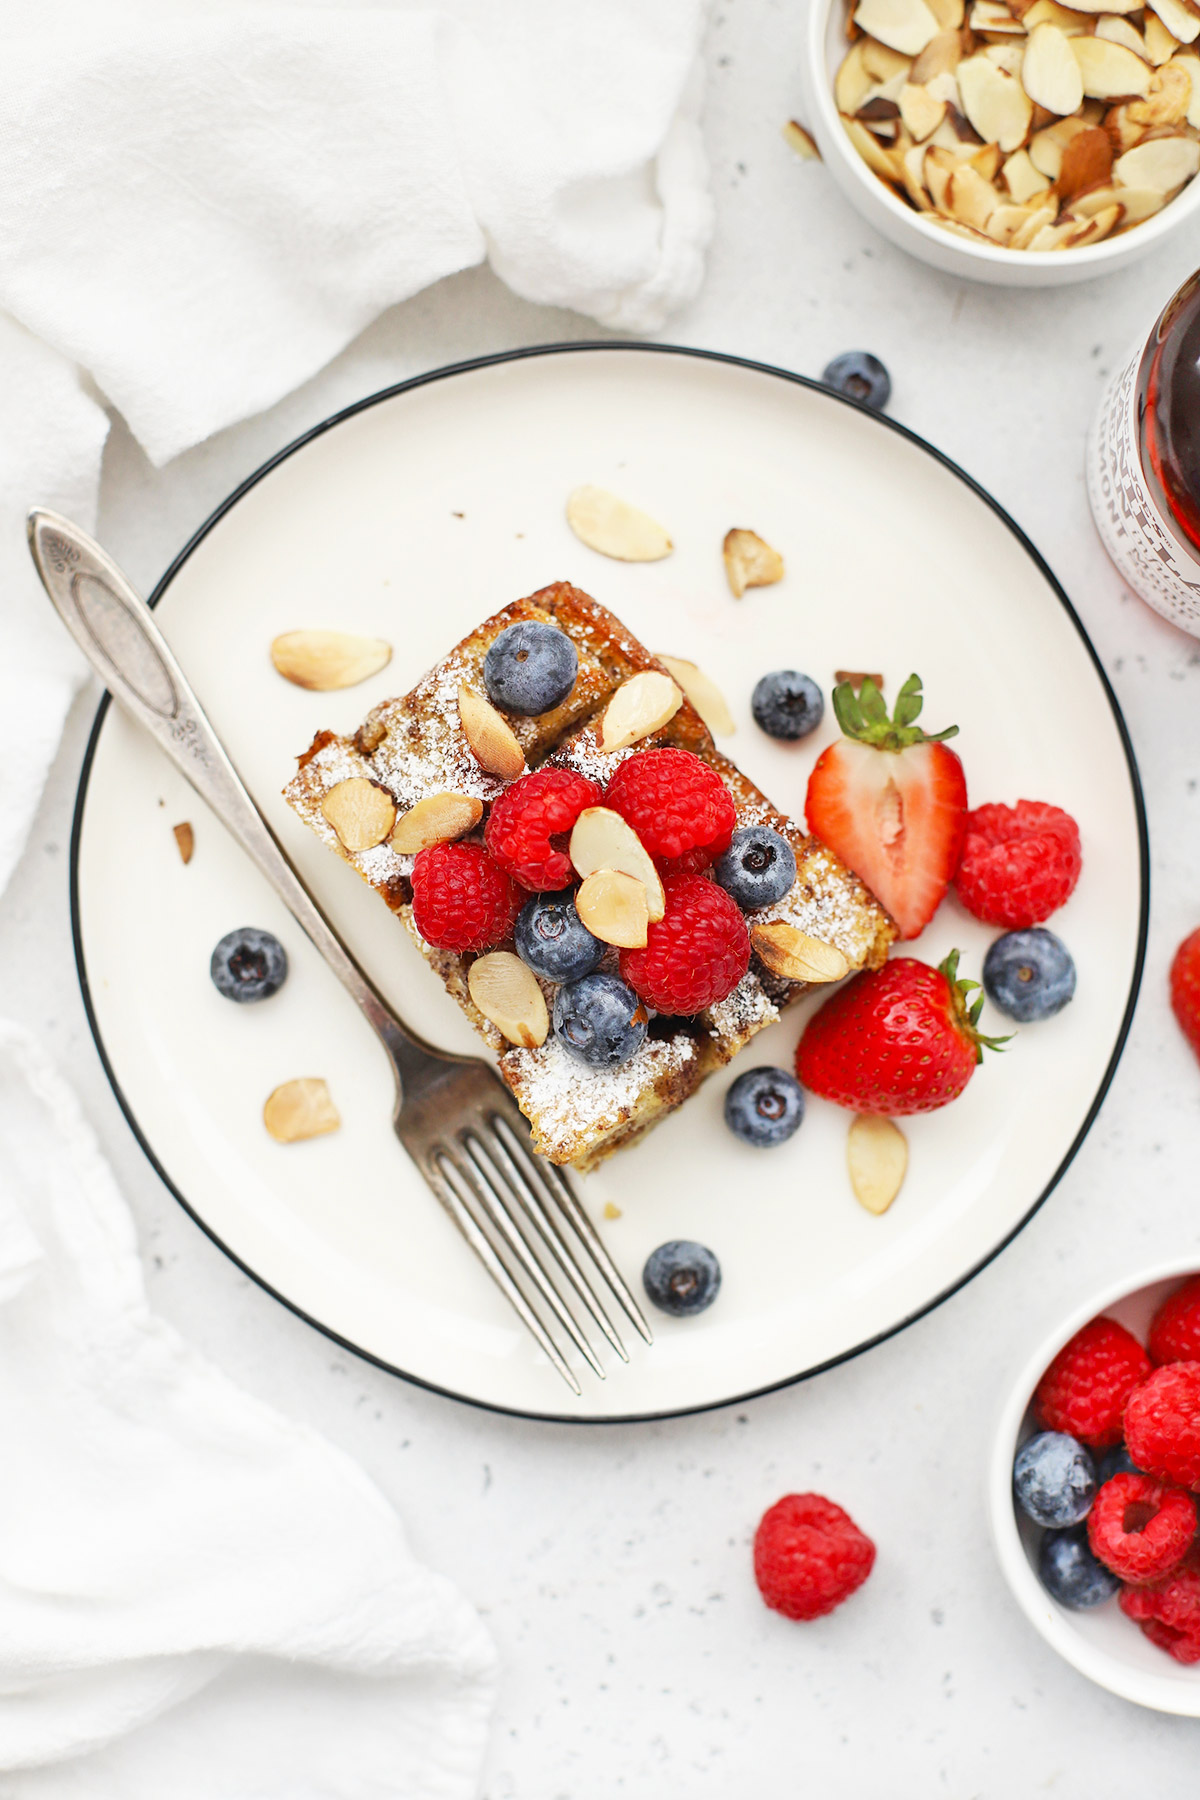 Overhead view of a slice of gluten-free french toast casserole on a white plate topped with berries and almonds